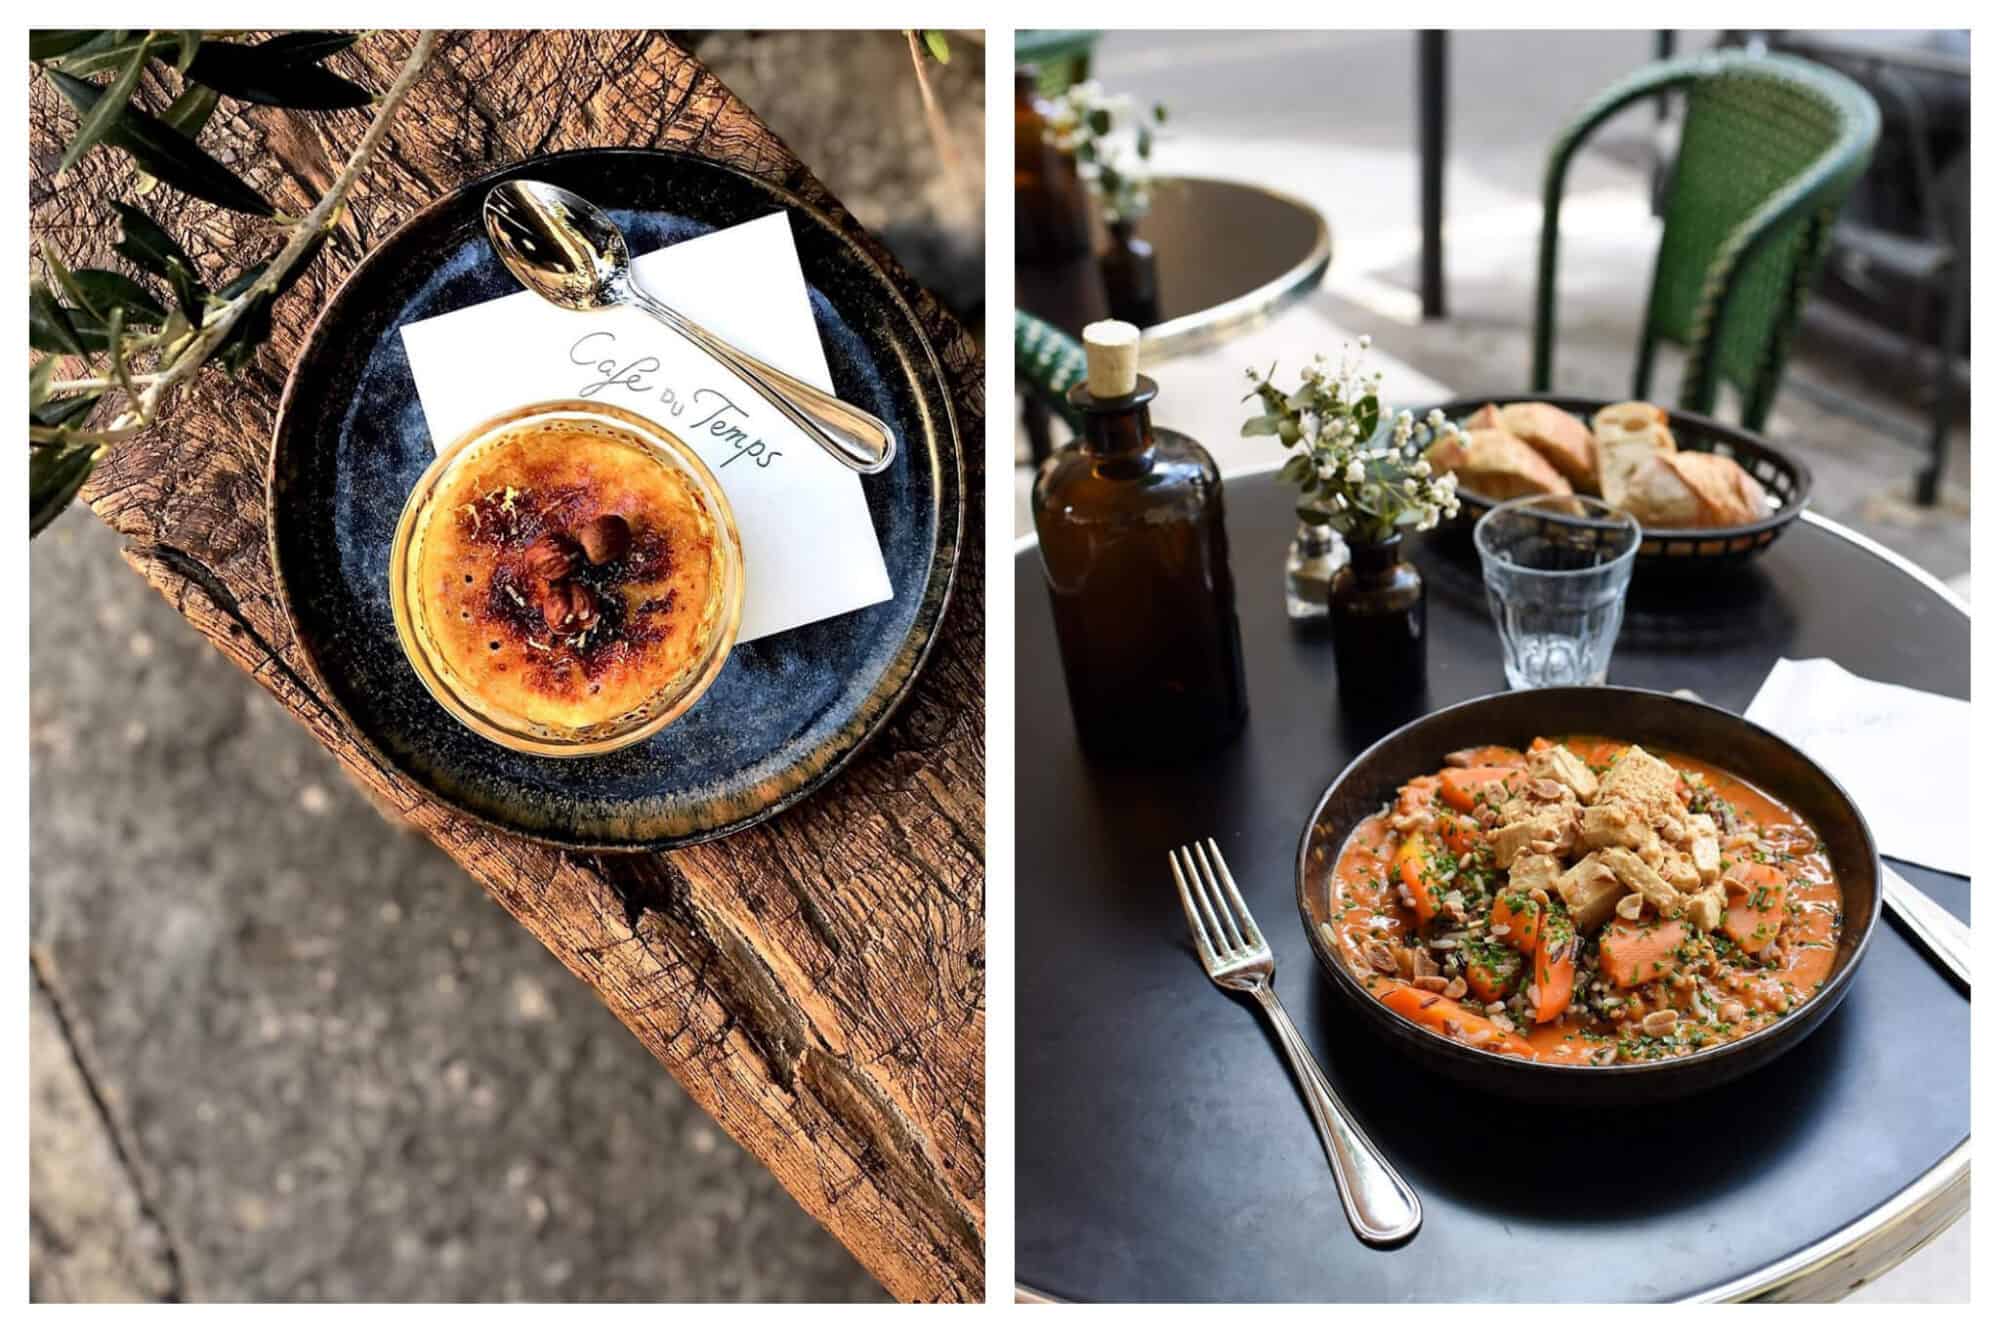 Left: An overhead shot of a delicious crème catalane sitting on a plate and a napkin printed with the name of the restaurant, Café du Temps, Right: A bowl of salade de lentilles du puy sits on a table with a basket of bread and vase of flowers at Café du Temps in Aix-en-Provence 